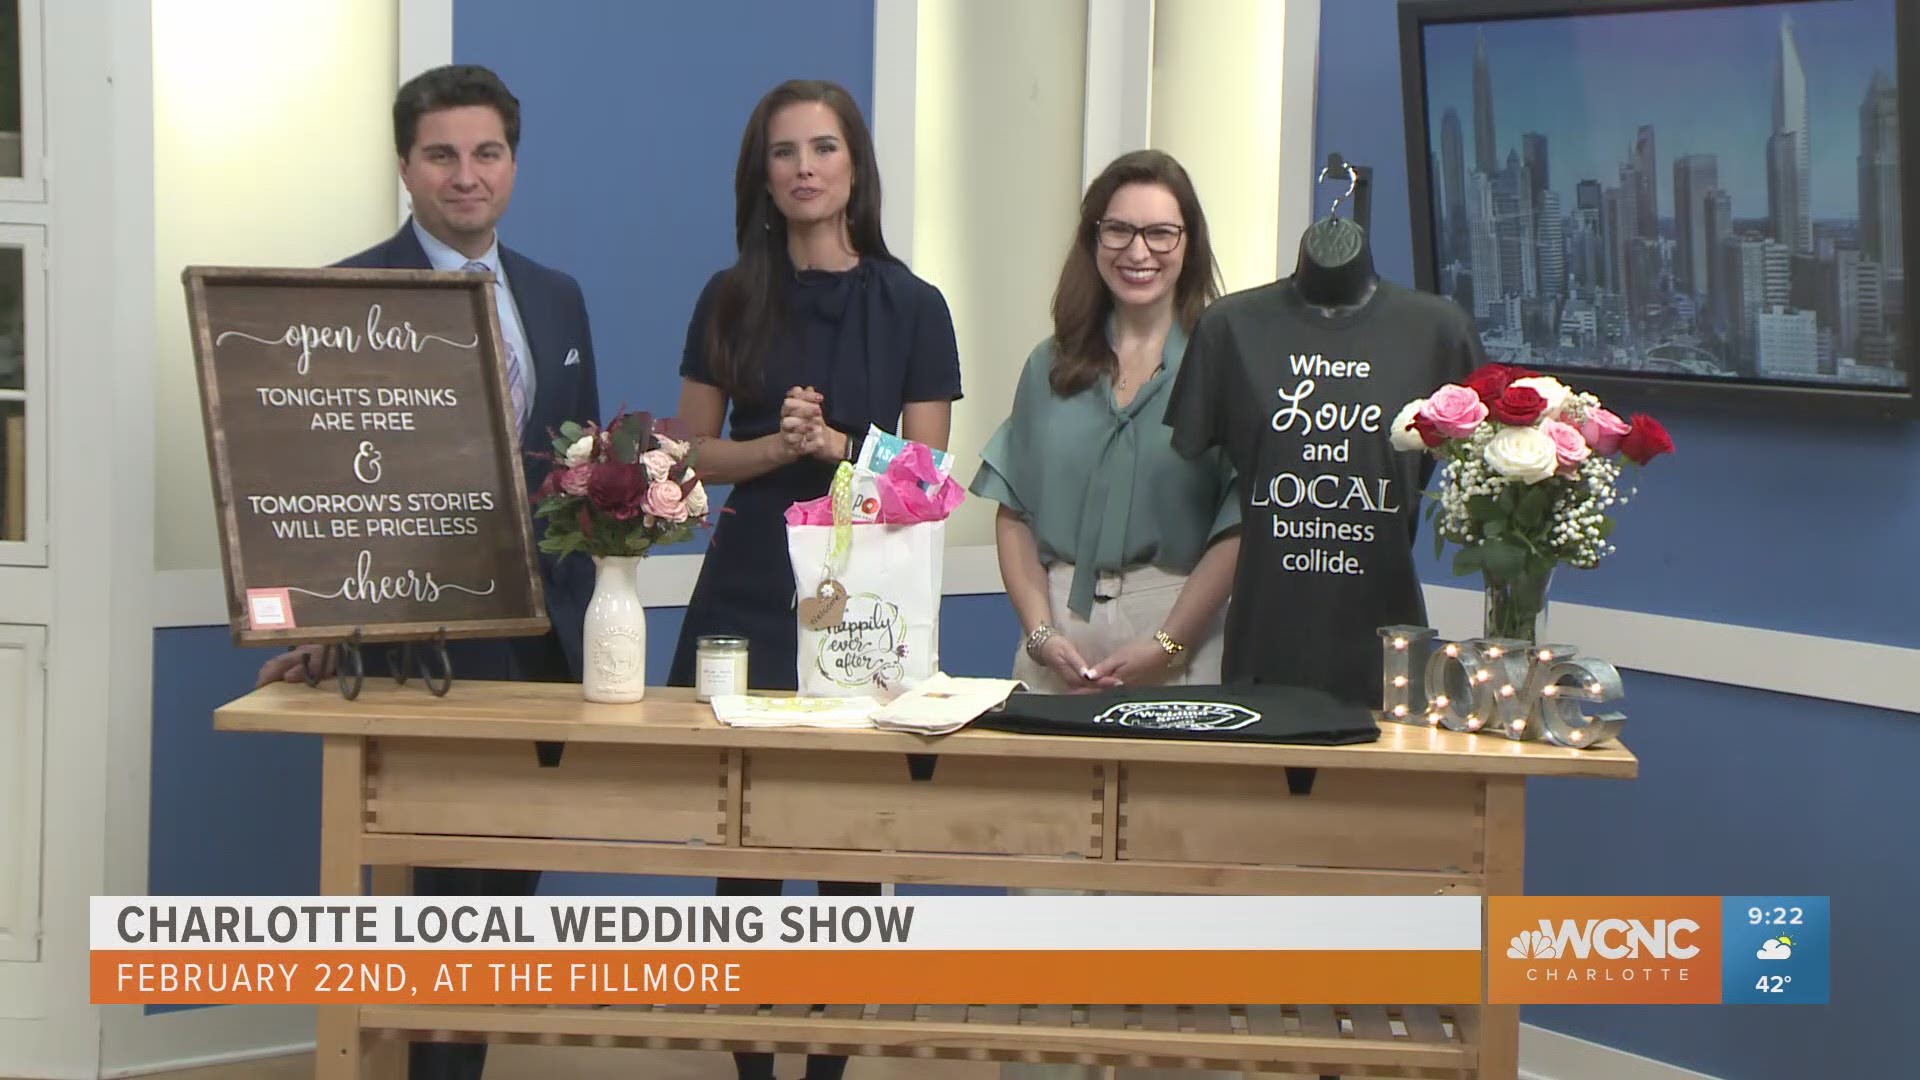 The show features 50 local vendors, mostly women-owned/operated companies, tickets still available. Link for tickets: www.charlottelocalweddingshow.com